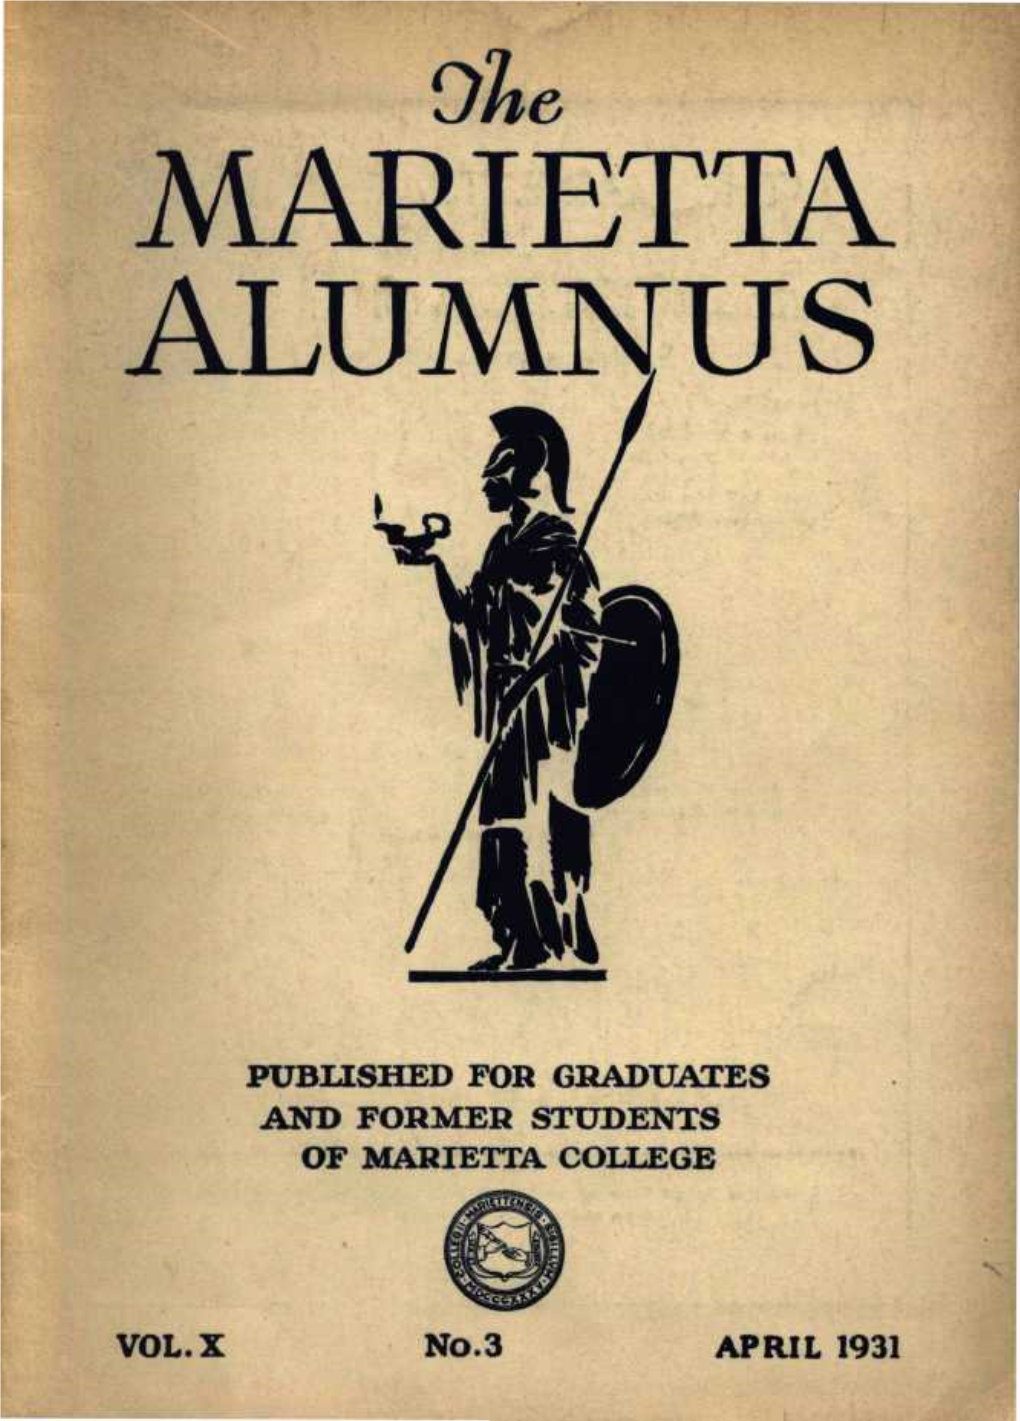 Published for Graduates and Former Students of Marietta College